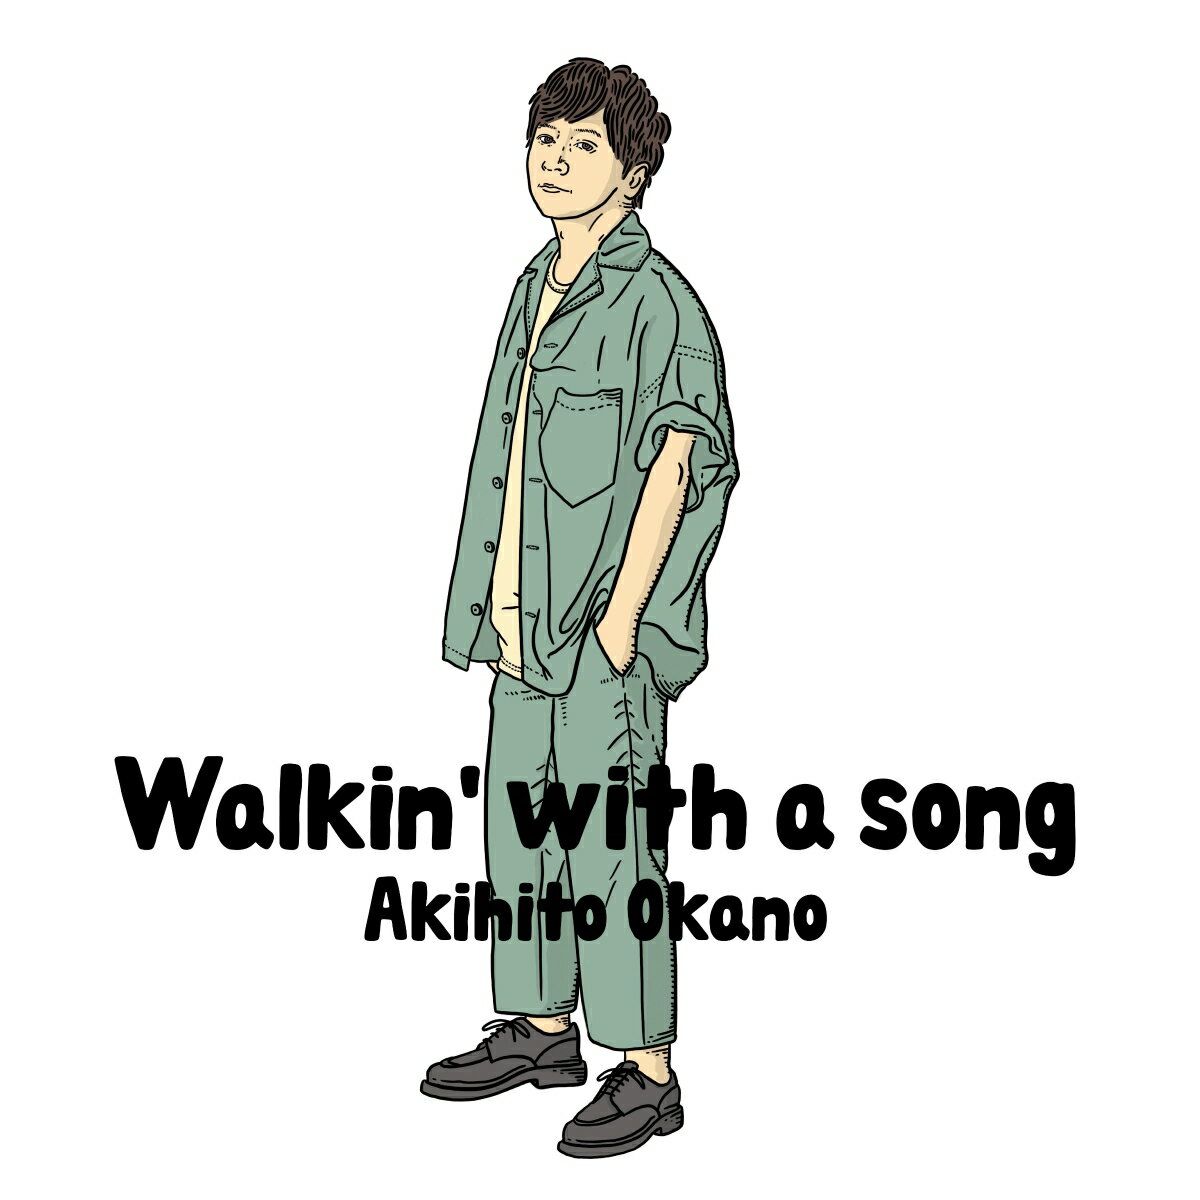 Walkin' with a song (初回生産限定盤B CD＋DVD)